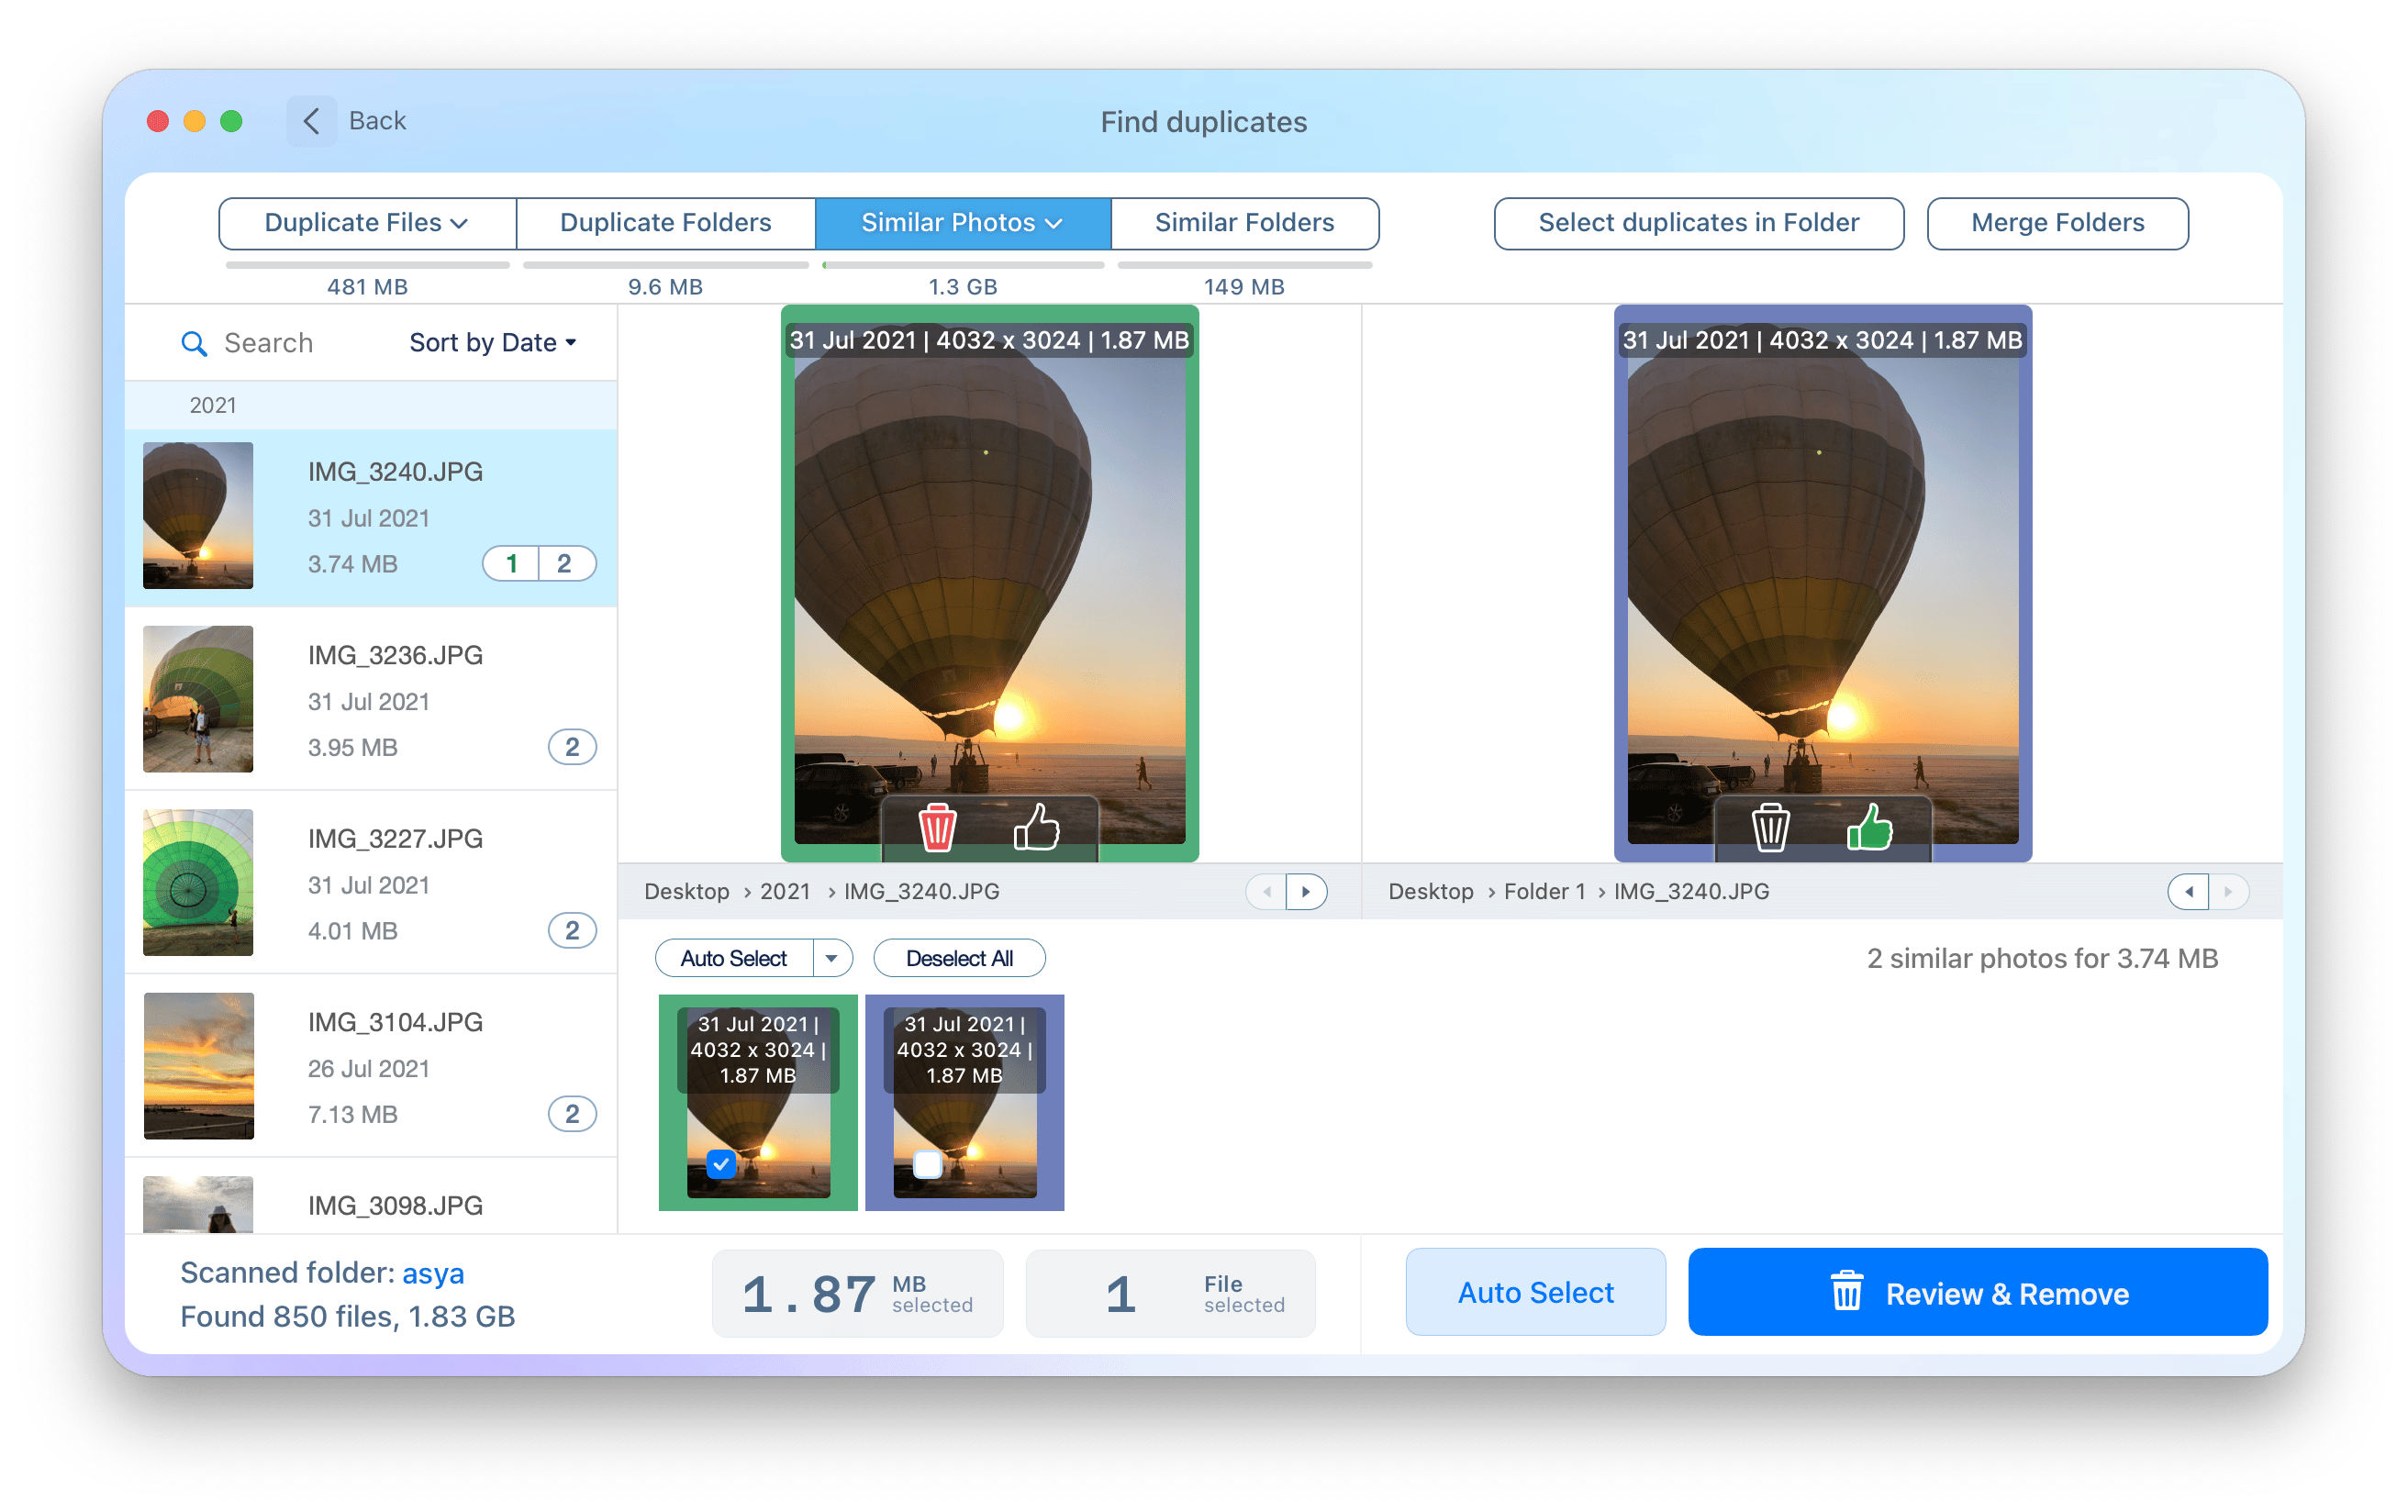 The similar photos section of Duplicate File Finder